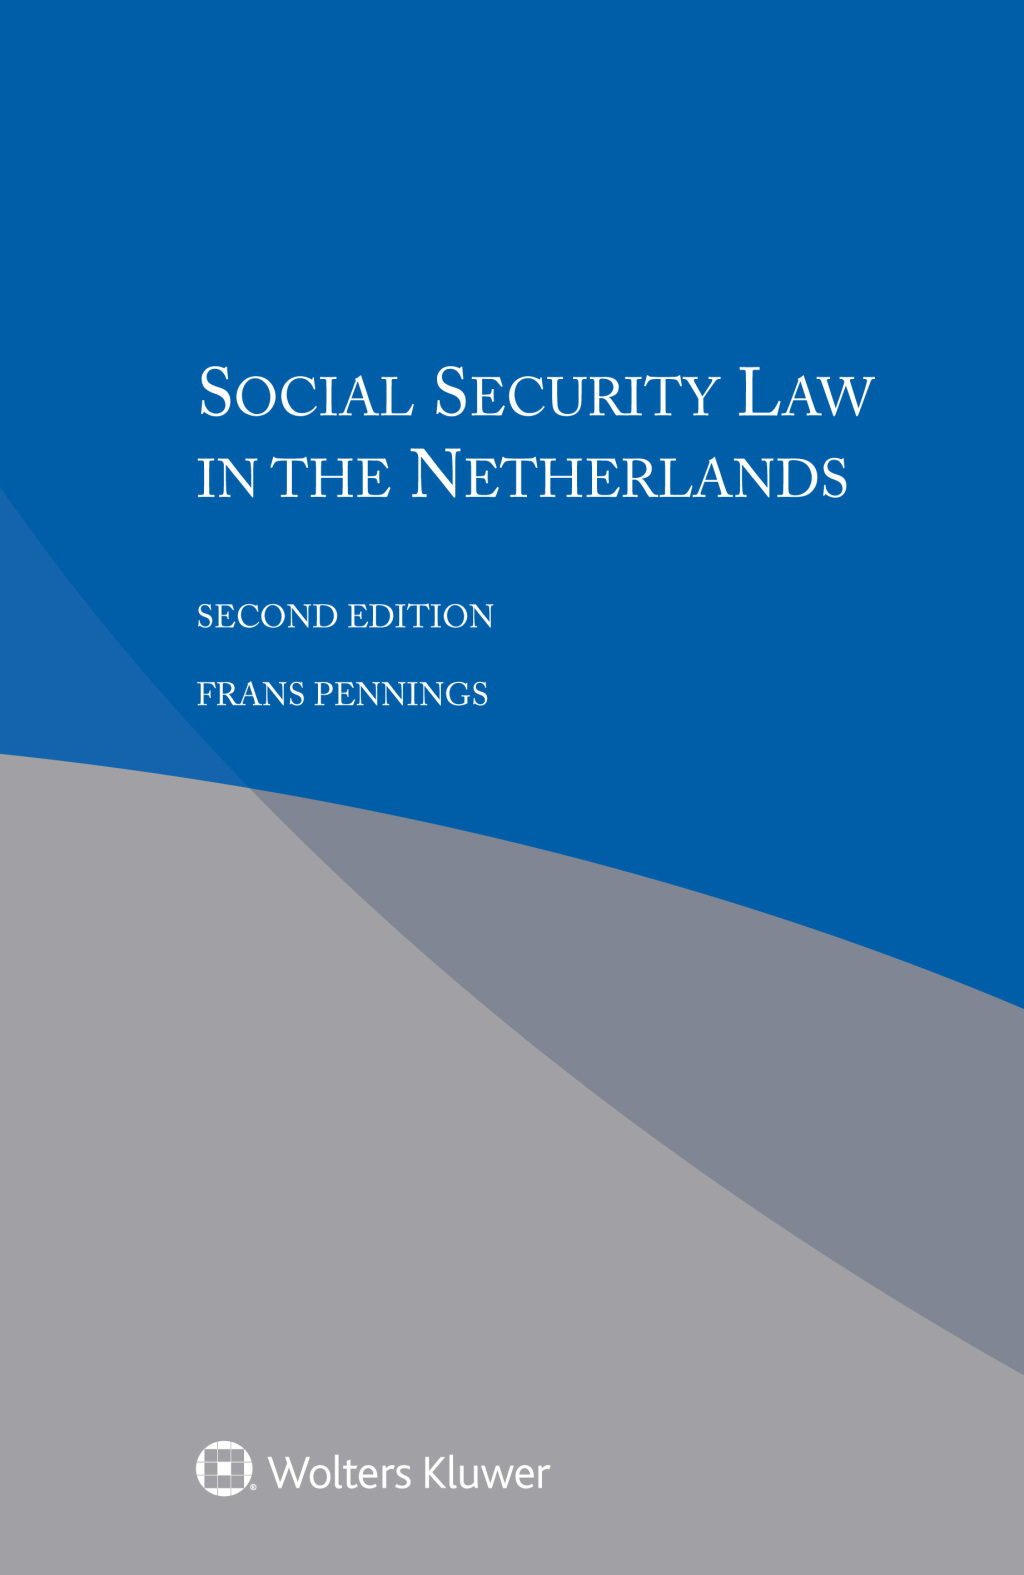 Social Security Law in the Netherlands - 2nd Edition (eBook Rental)